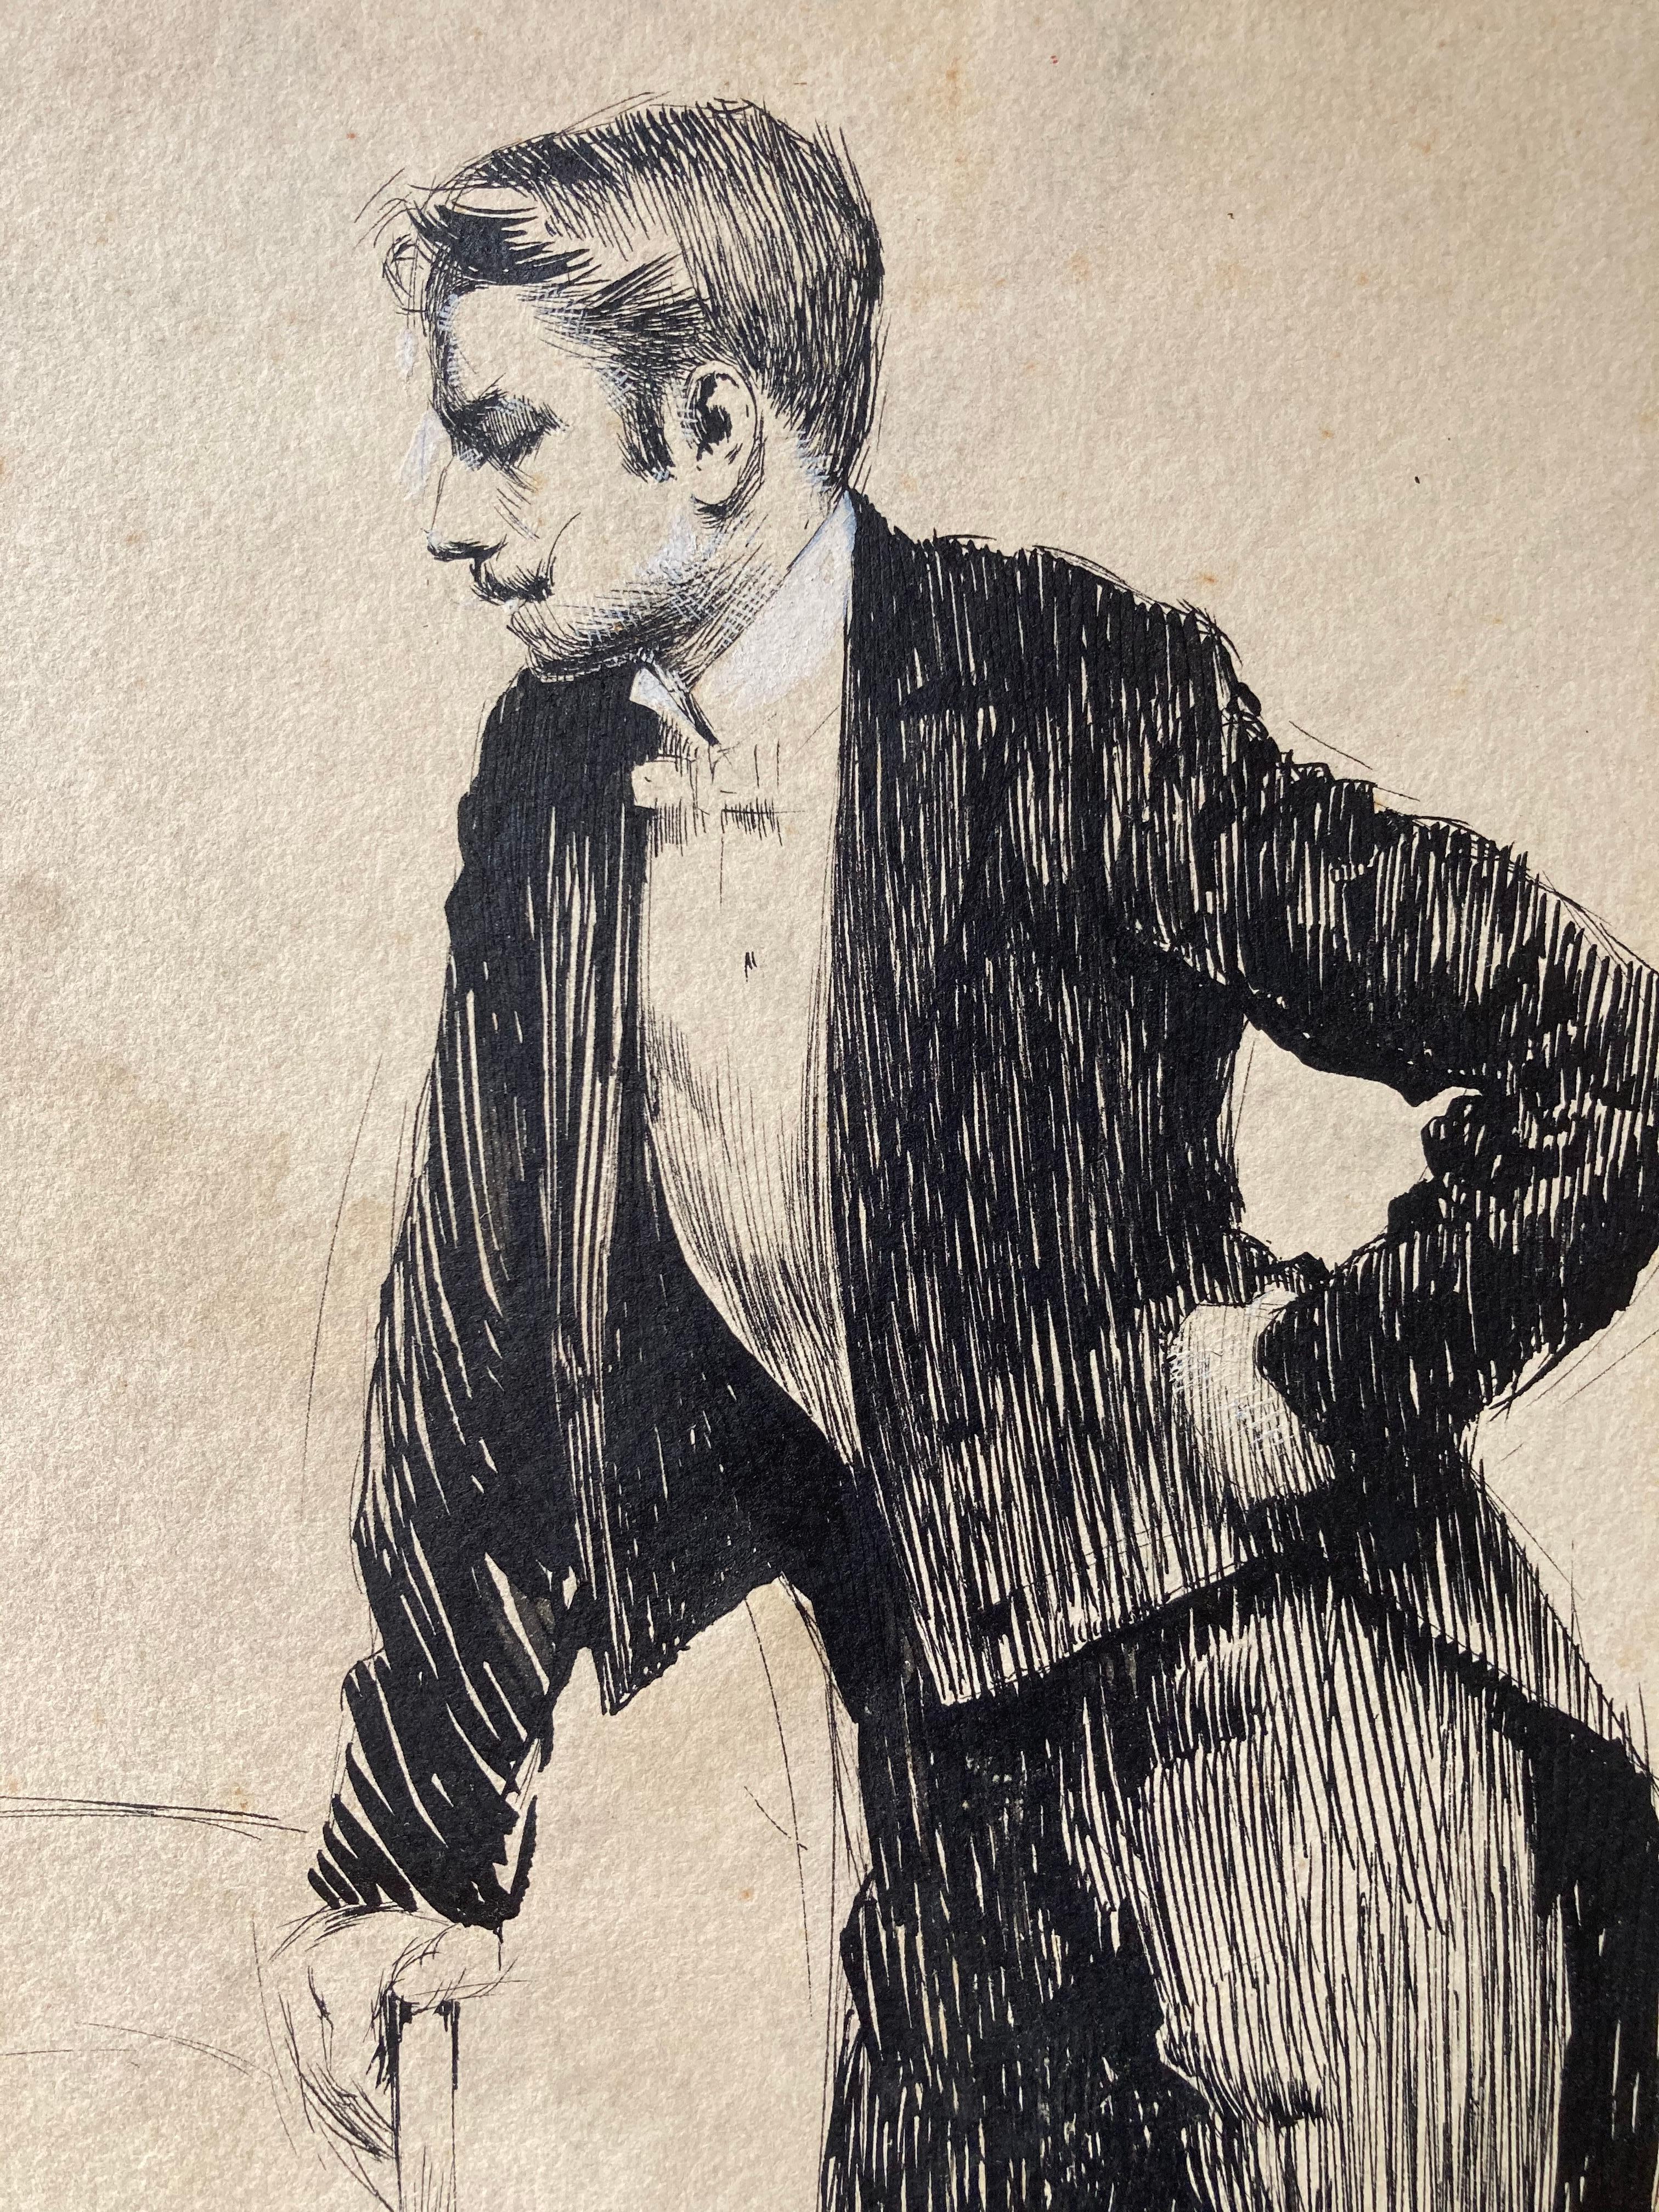 Many of you clicking on this pen-and-ink of a dapper gentleman are probably doing so because you know of Ellsworth Woodward, who with his brother William Woodward around the turn of the 20th century sparked an arts renaissance in the South, the arts